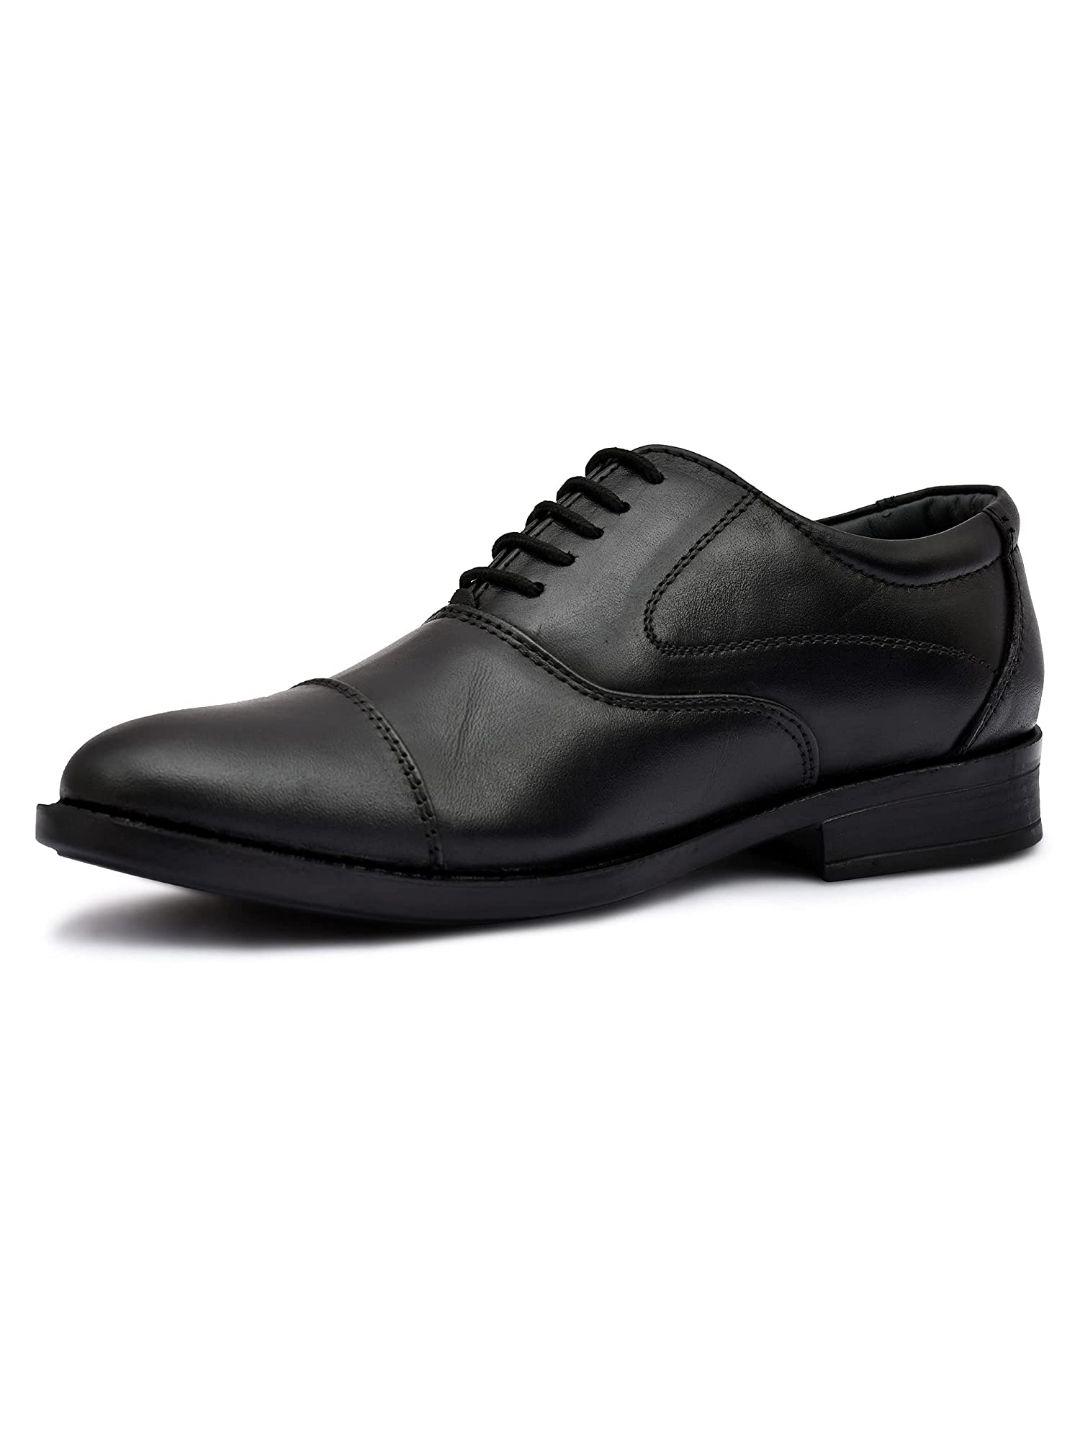 MAEVE & SHELBY Mens Formal Oxford Shoes